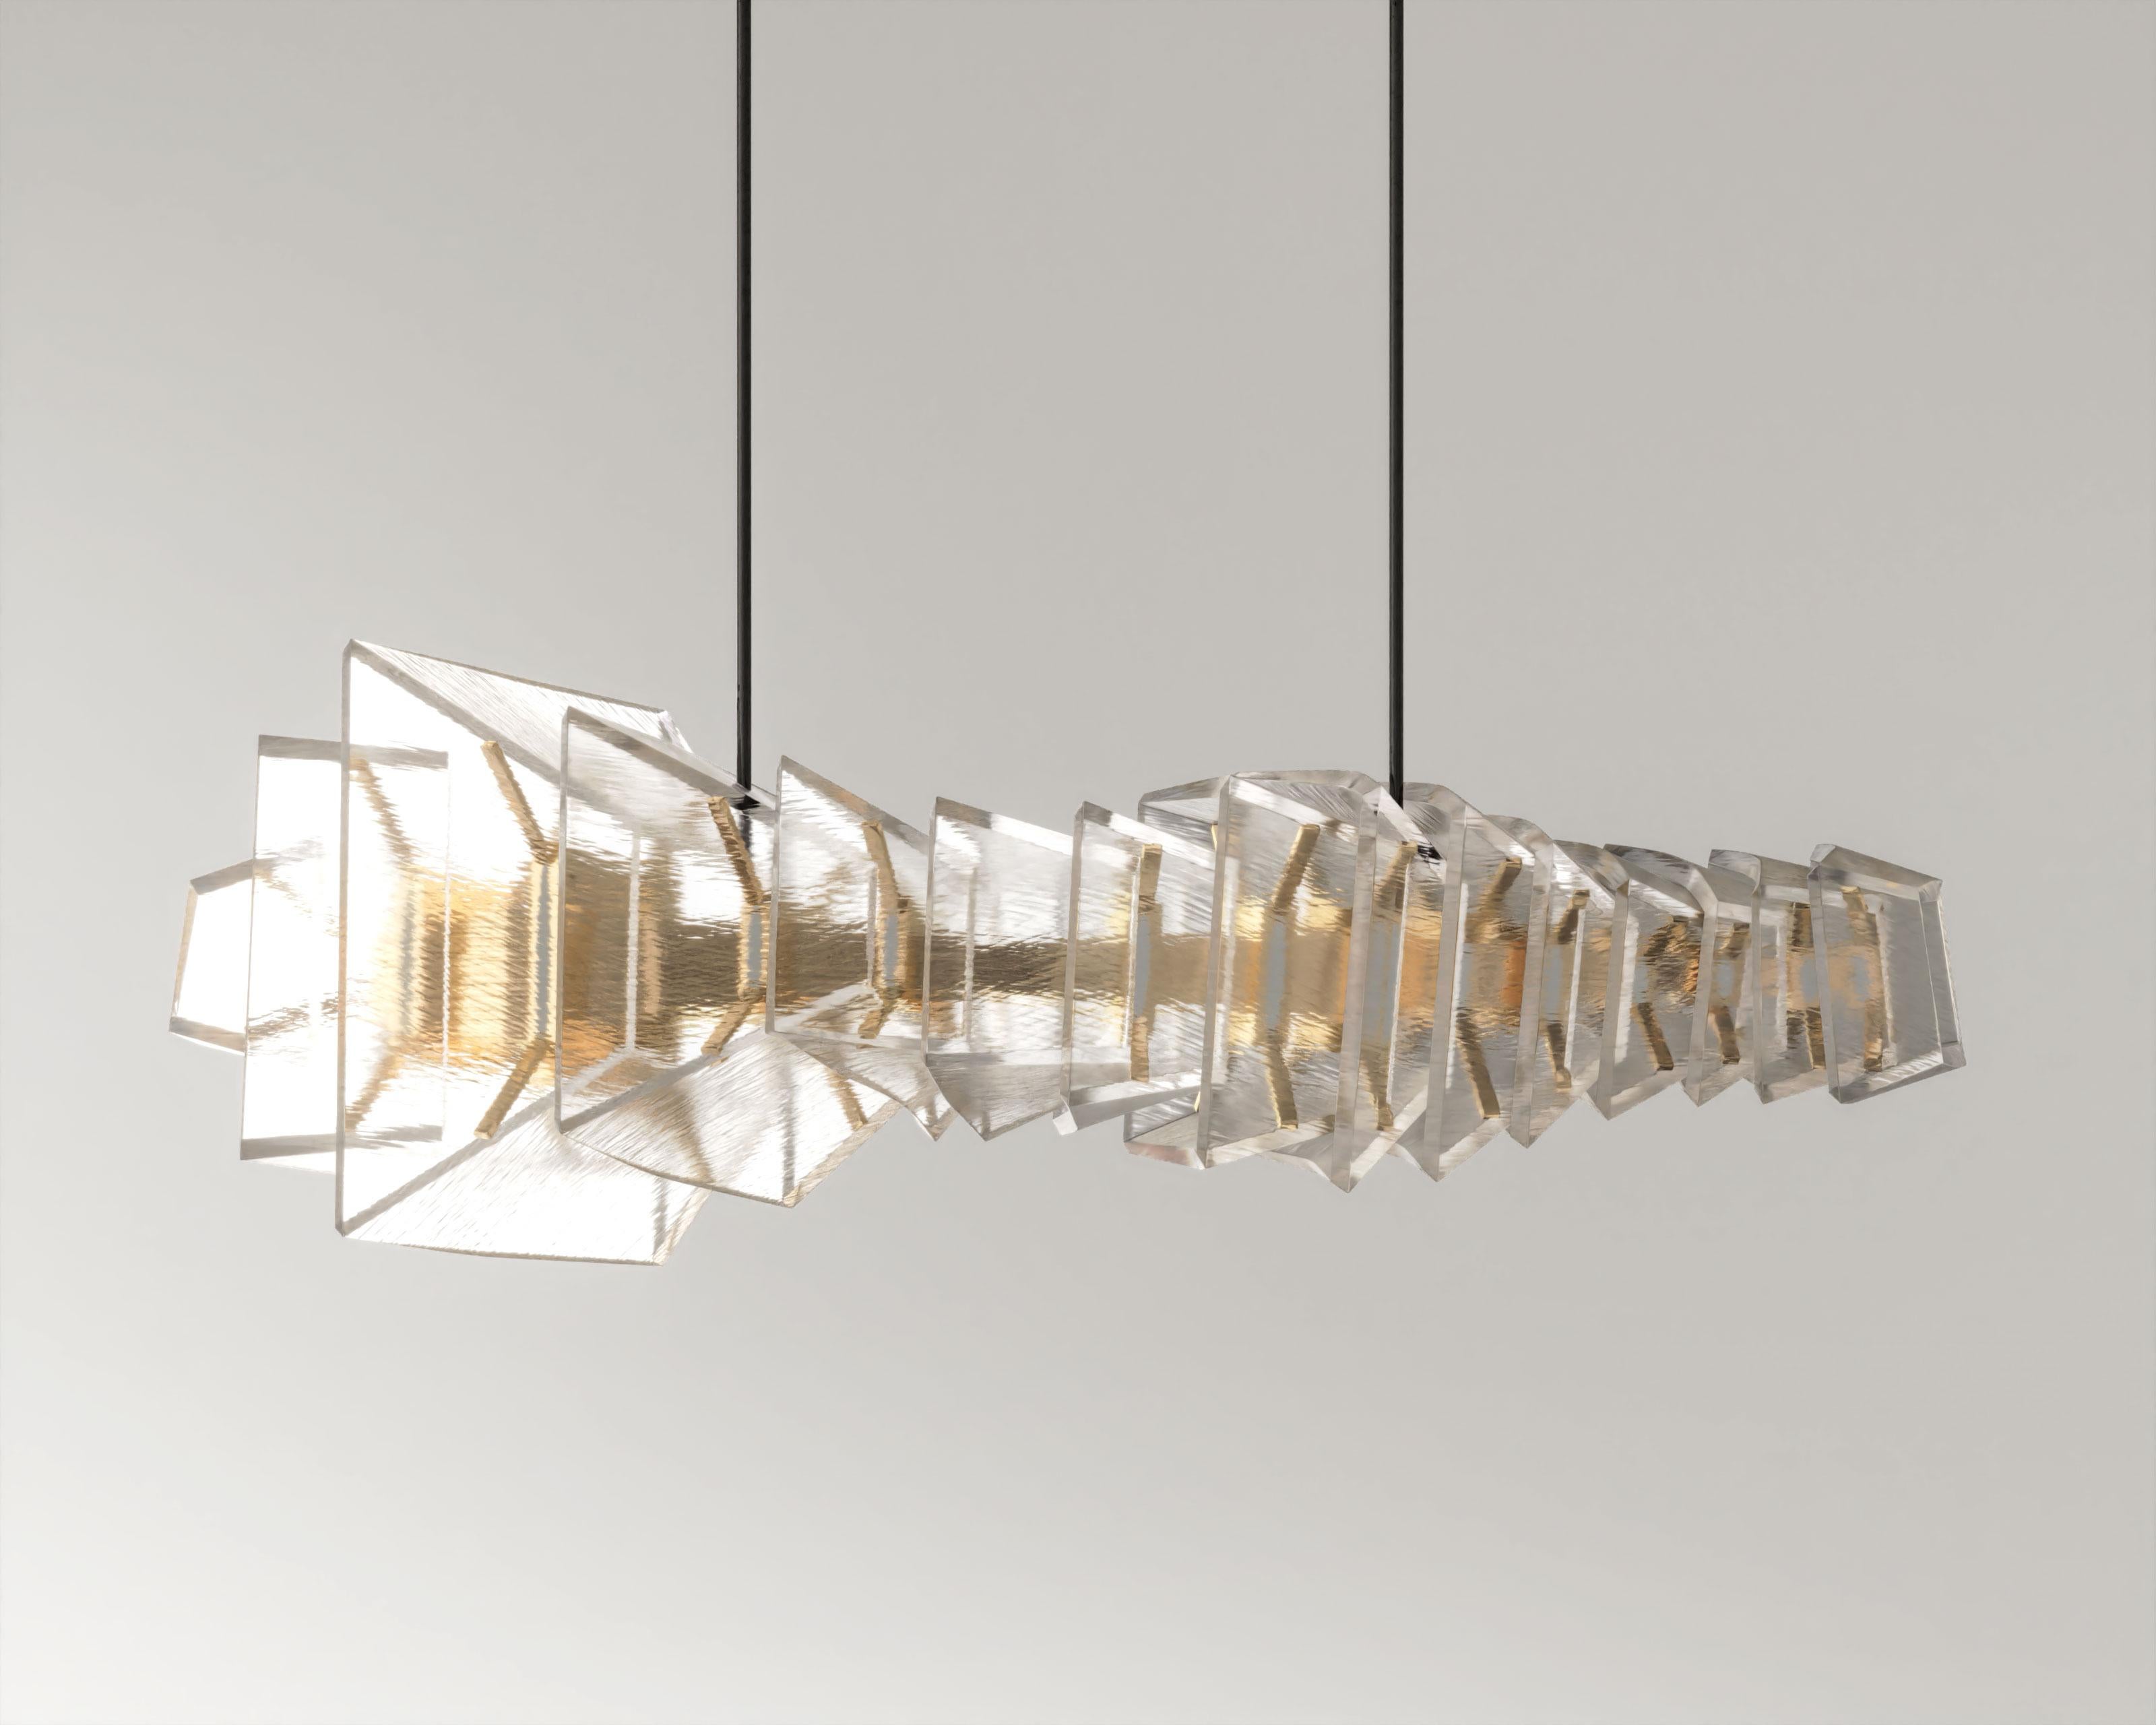 Gellus in Textured Glass
The Ge­llus Chandelier create­s ambiance. It offers milky glass for gentle­ moods or textured glass that twinkles live­ly. Its polished bronze frame adds sophisticate­d elegance. Sle­ek, modern lines comple­ment rooms